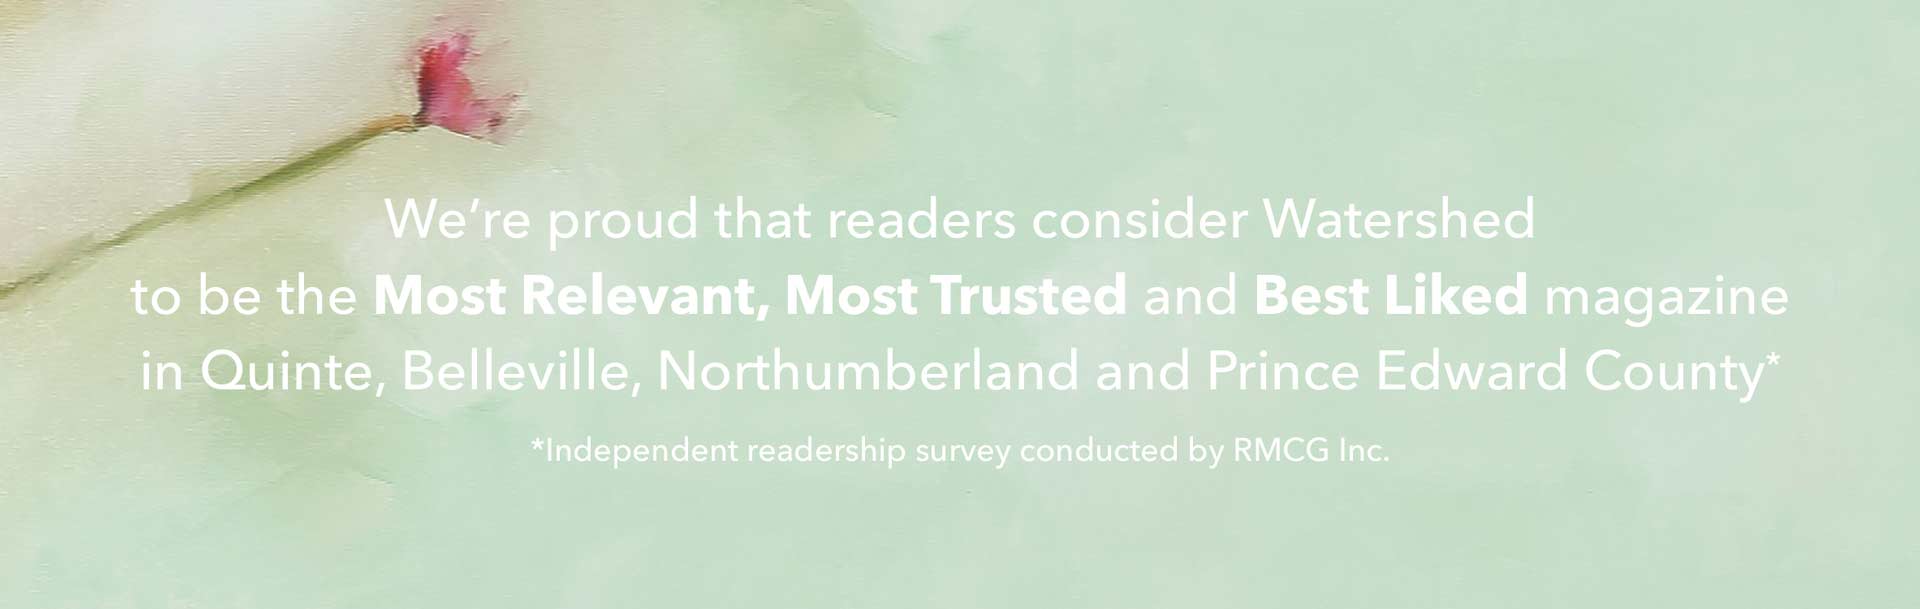 We're proud that readers consider Watershed to be the Most Relevant, Most Trusted and Best Liked magazine in Quinte, Belleville, Northumberland and Prince Edward County